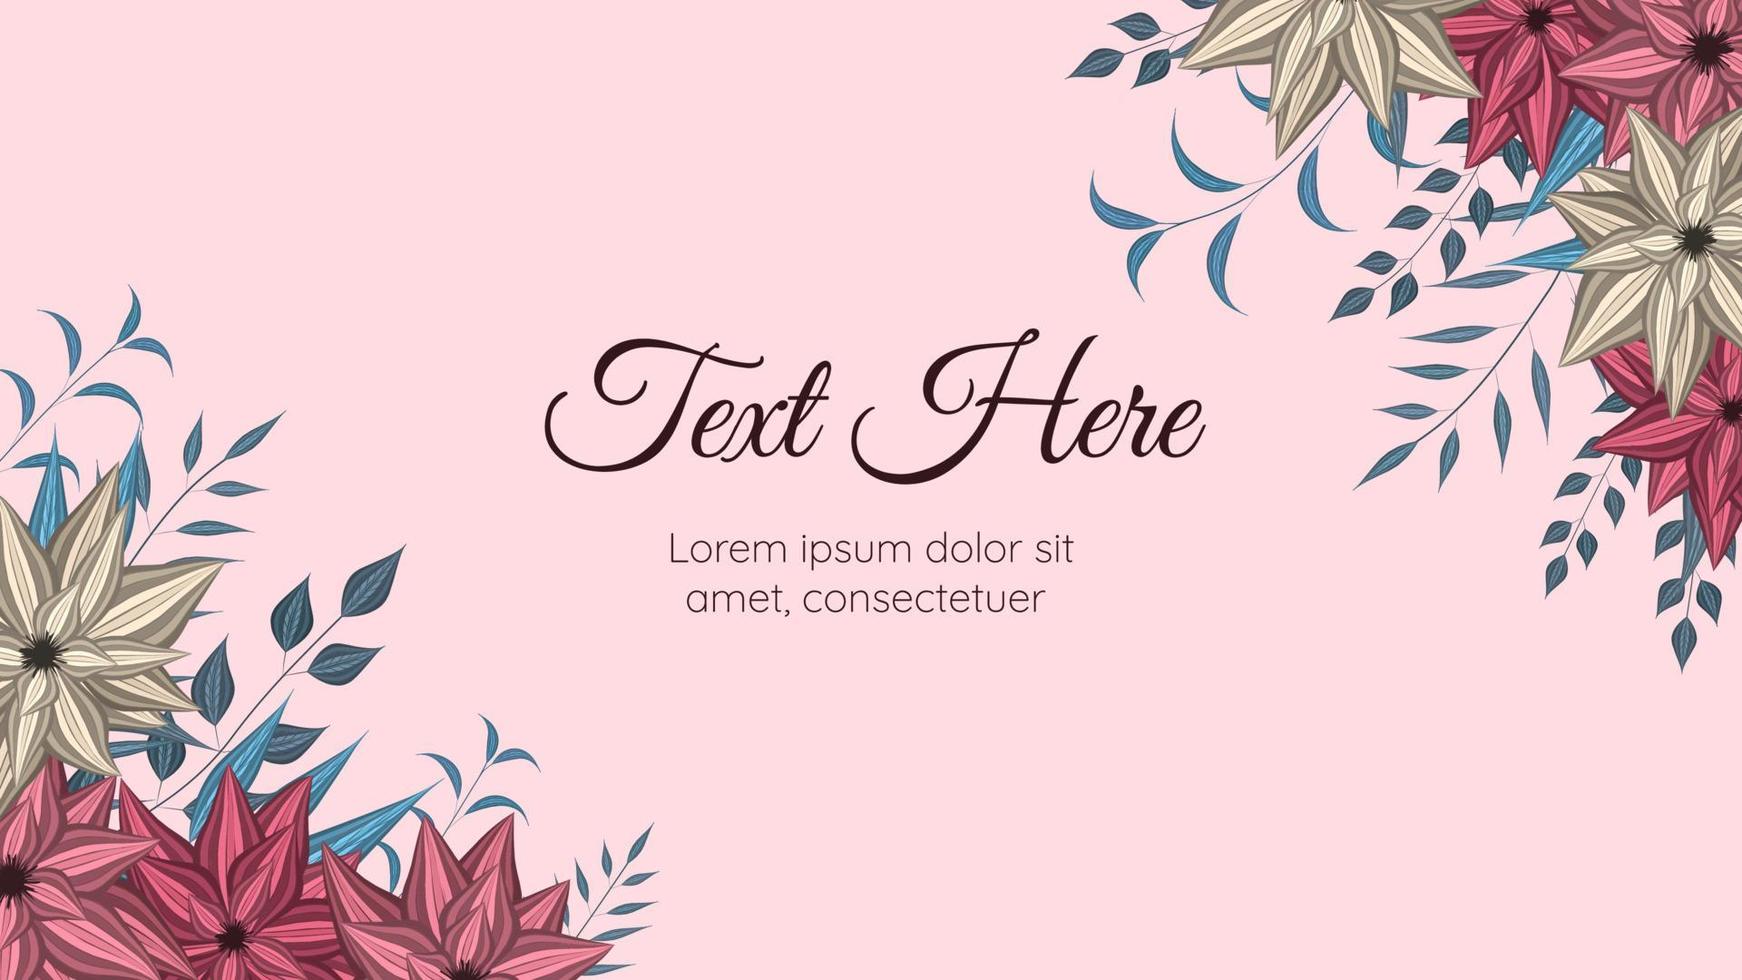 Stunning spring floral background template with tender flowers vector